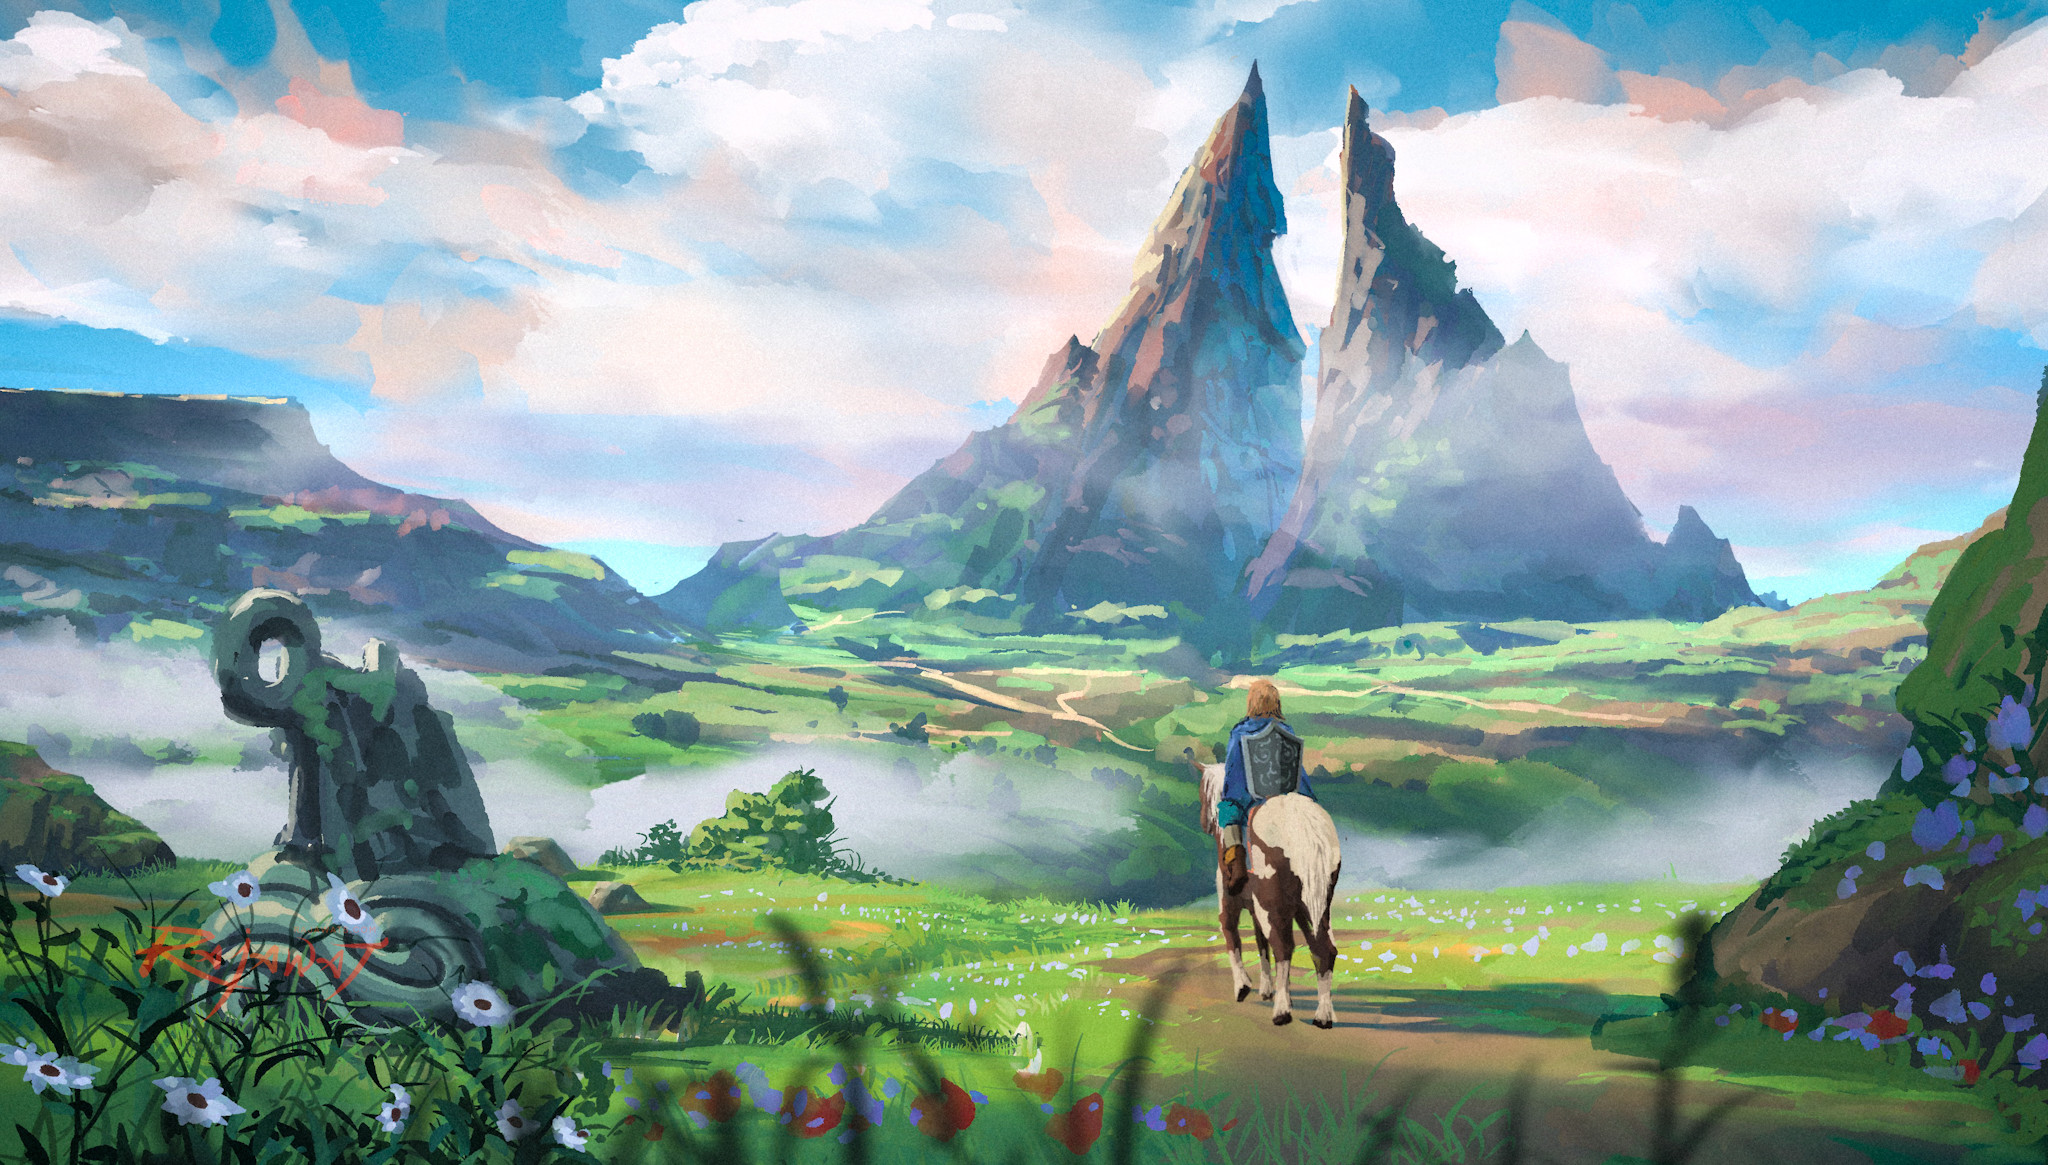 Video Game The Legend of Zelda: Breath of the Wild HD Wallpaper by